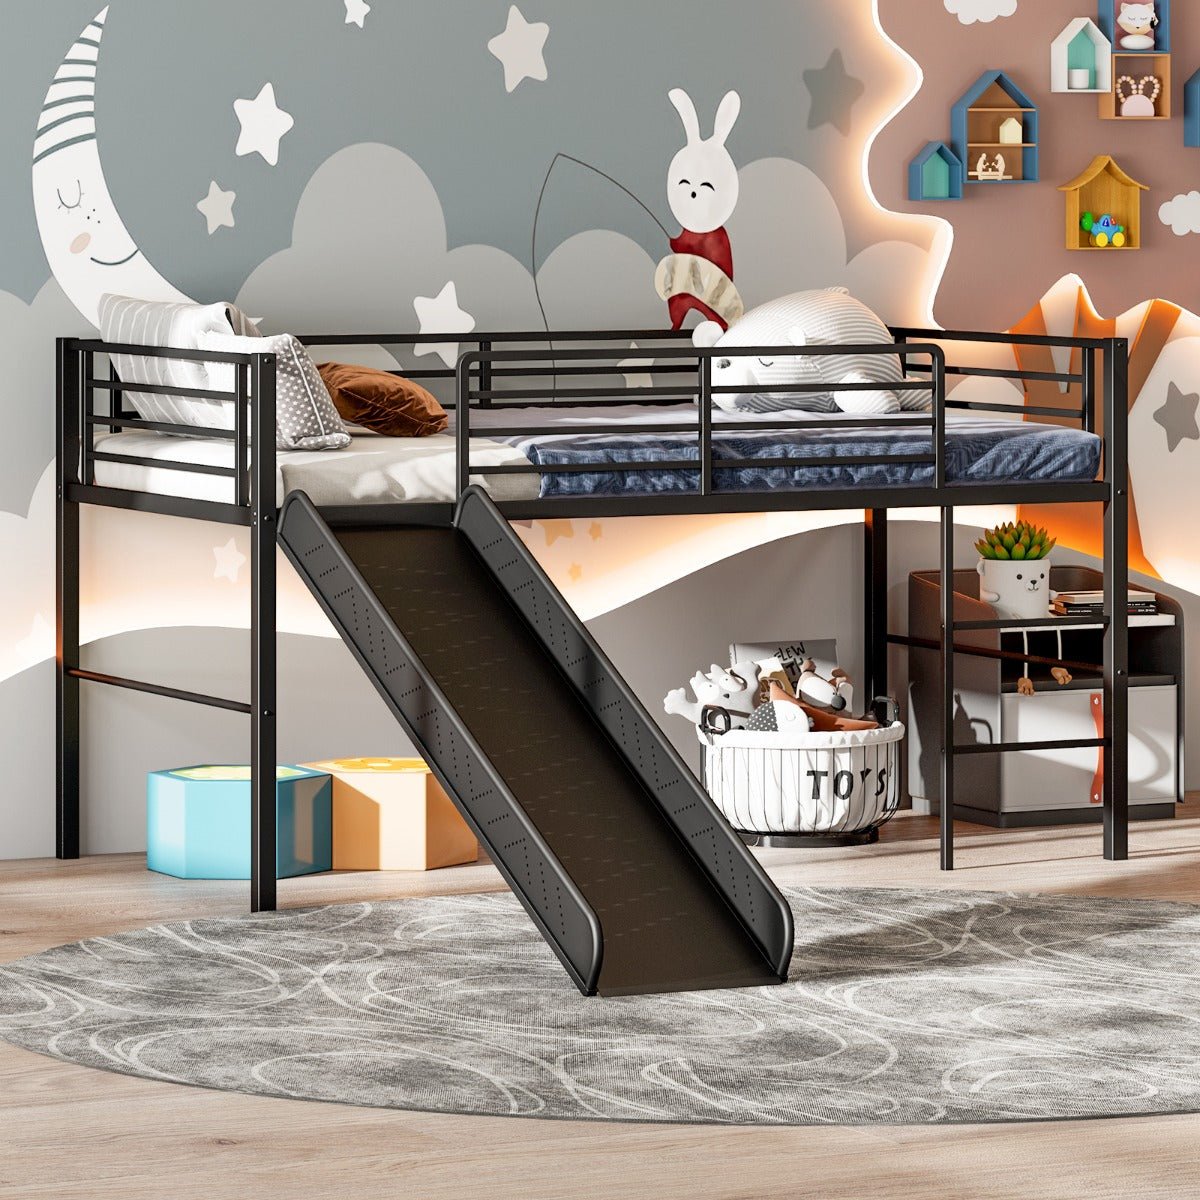 Explore, Dream, and Play on Our Loft Bed